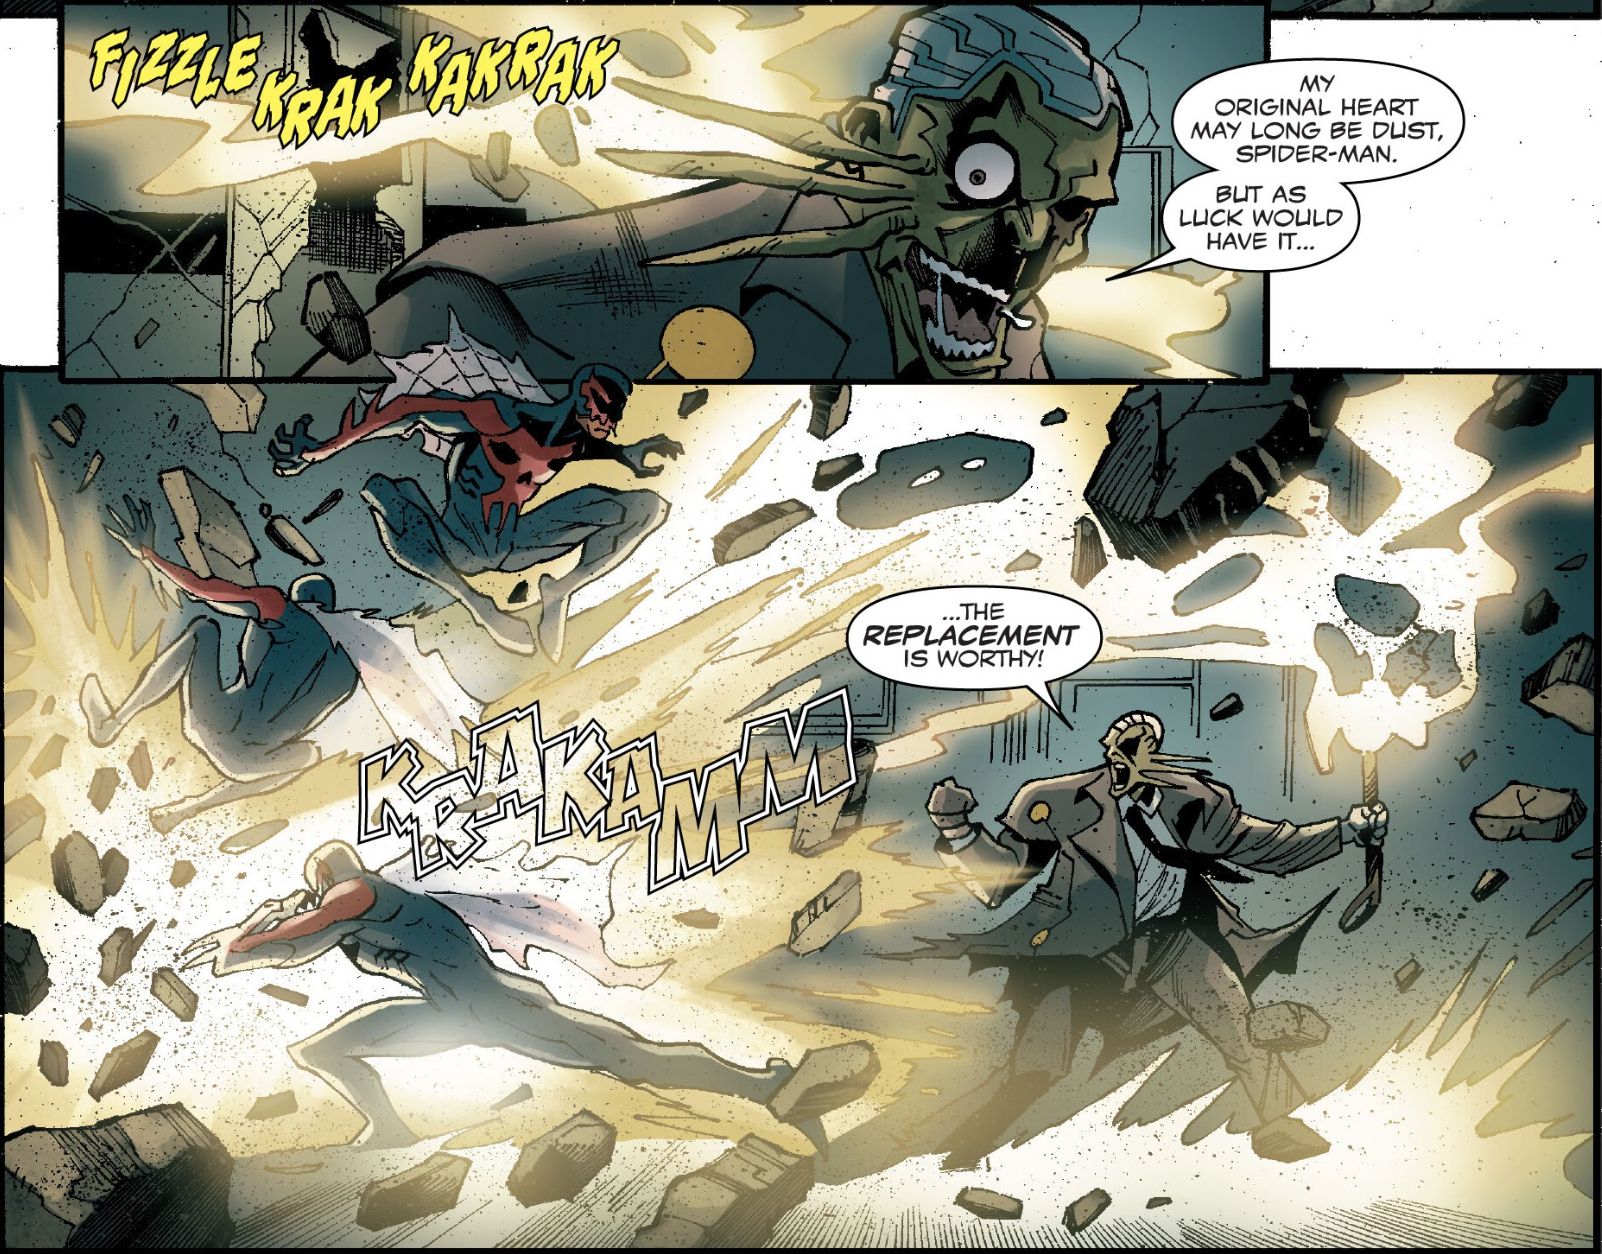 A close-up on Terror's gruesome, manic expression as he wields Stormbreaker. In the panel below, Spider-Man 2099 flips and jumps out of the way of the torrent of lightning that comes streaming out from the hammer.